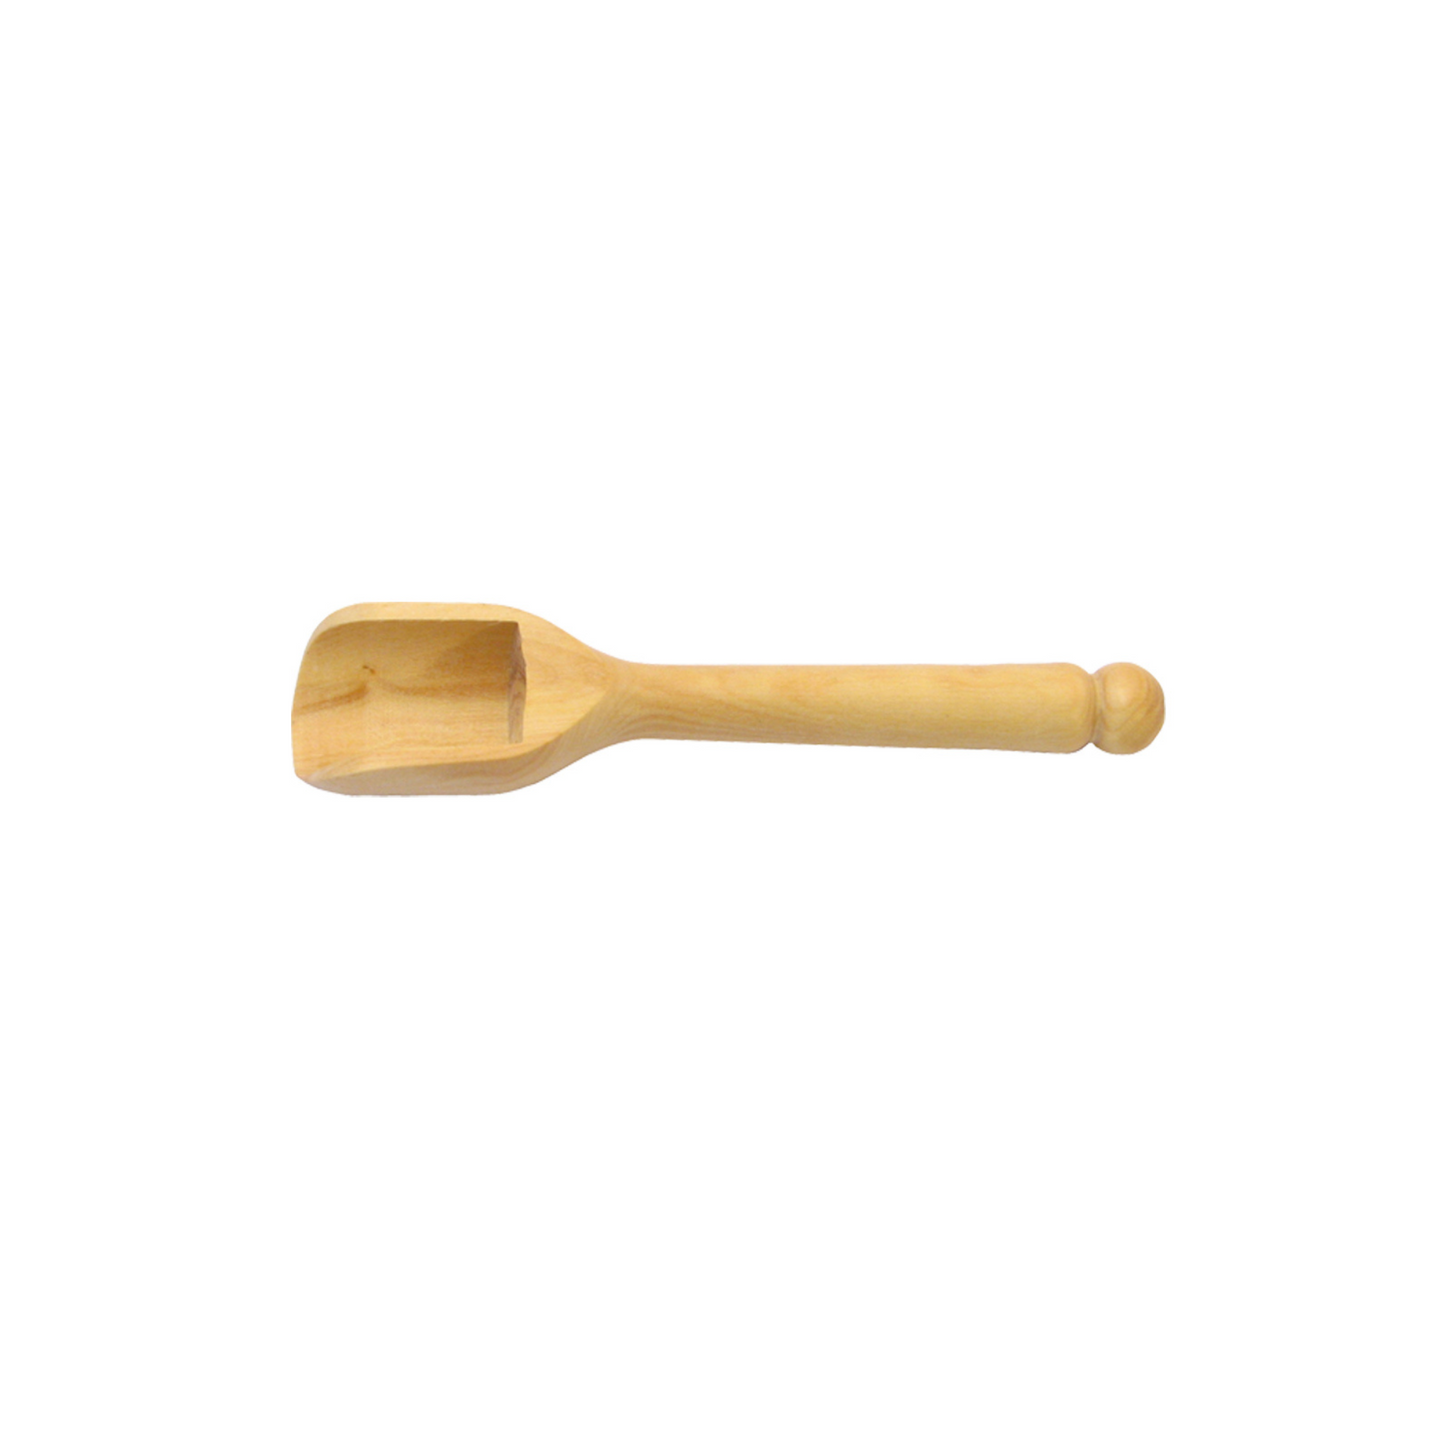 Pinch scoop Fleur de Sel in Boxwood Made in France Clementine Boutique